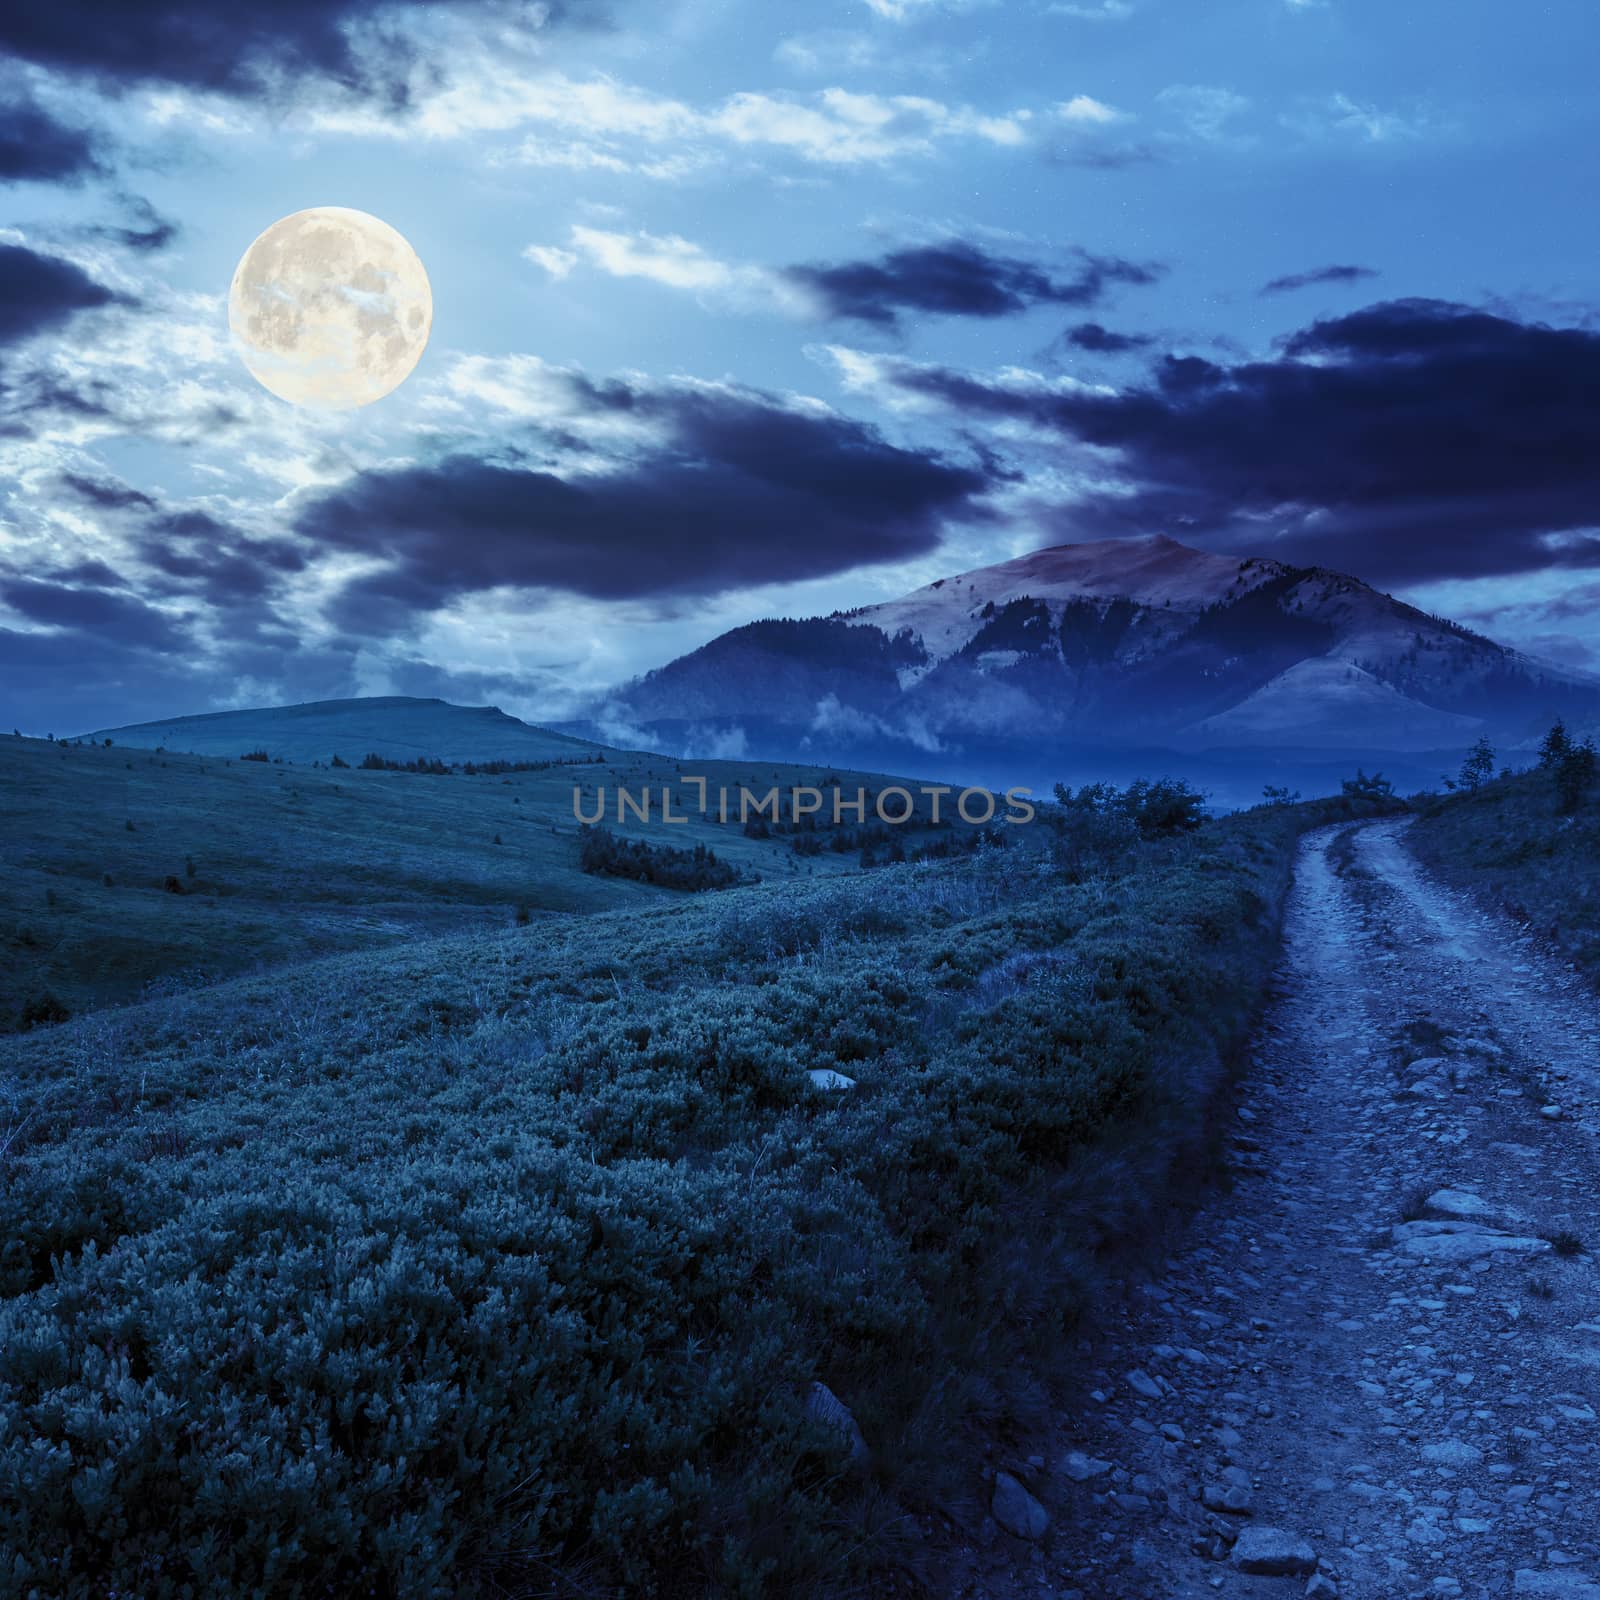 gravel road to high mountains at night by Pellinni